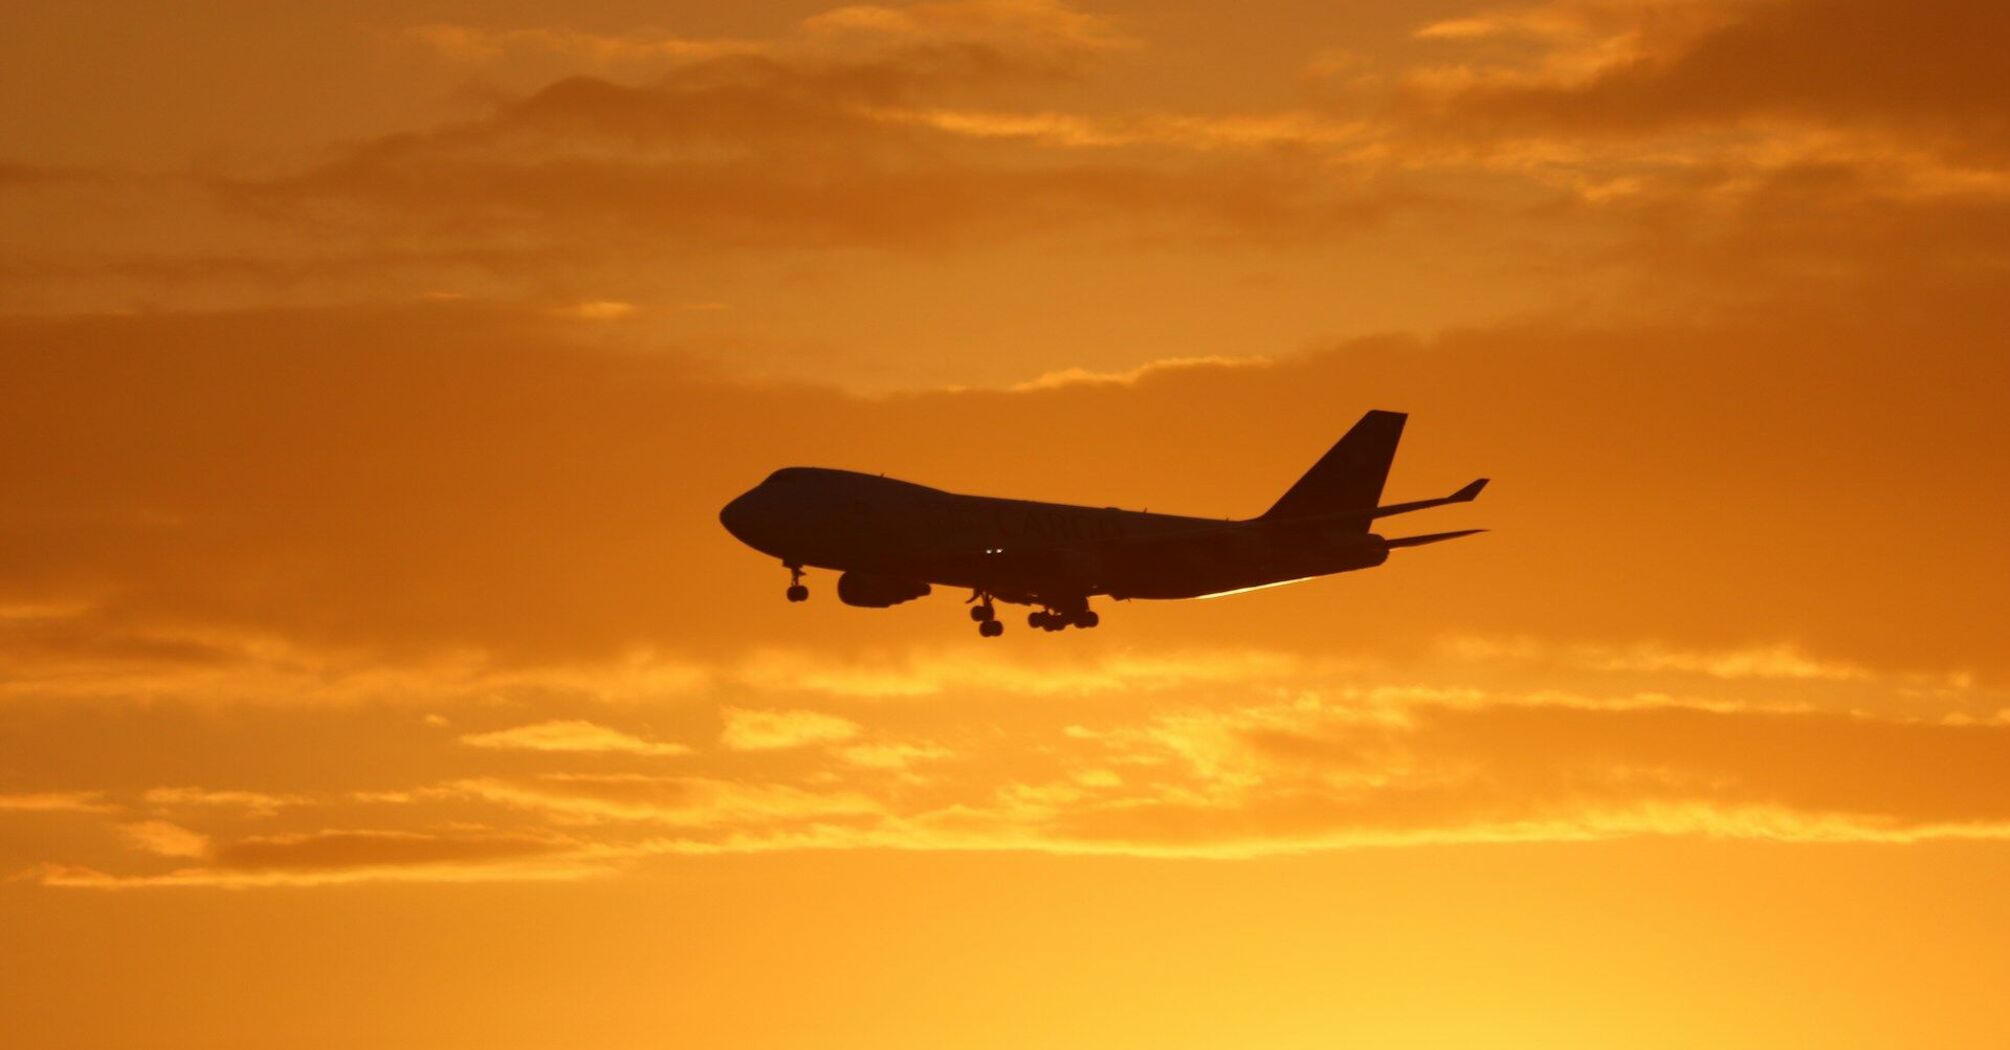 Silhouette of a cargo Boeing 747 airplane landing at sunset with a vibrant orange sky in the background 